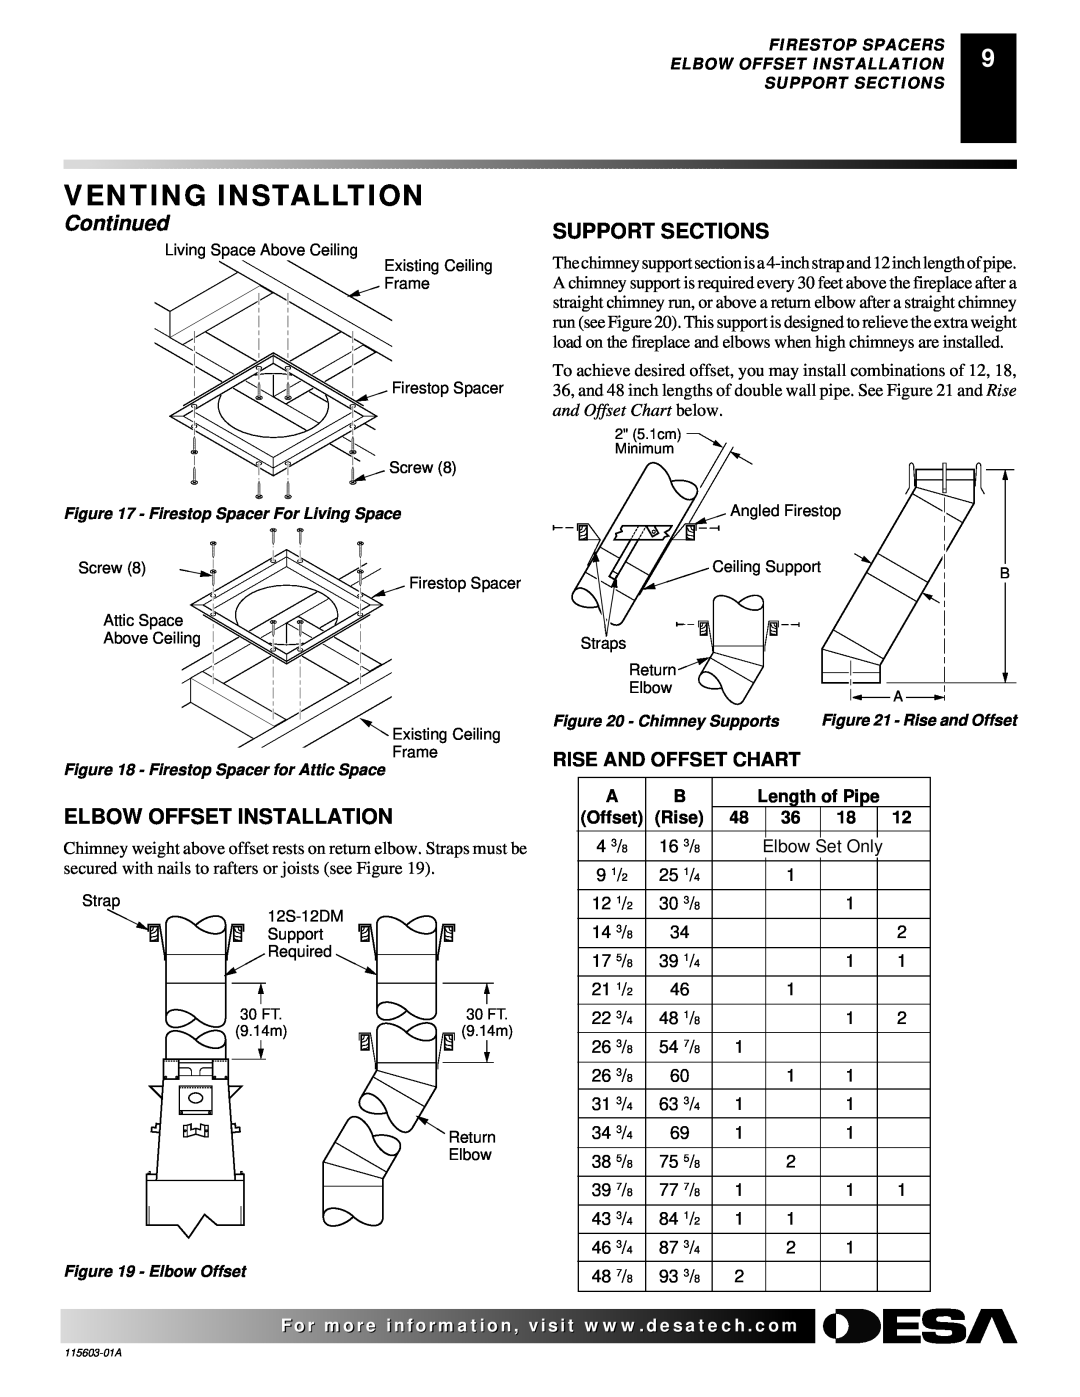 Desa (V)3612ST operating instructions Venting Installtion, Continued, Support Sections, Elbow Offset Installation 